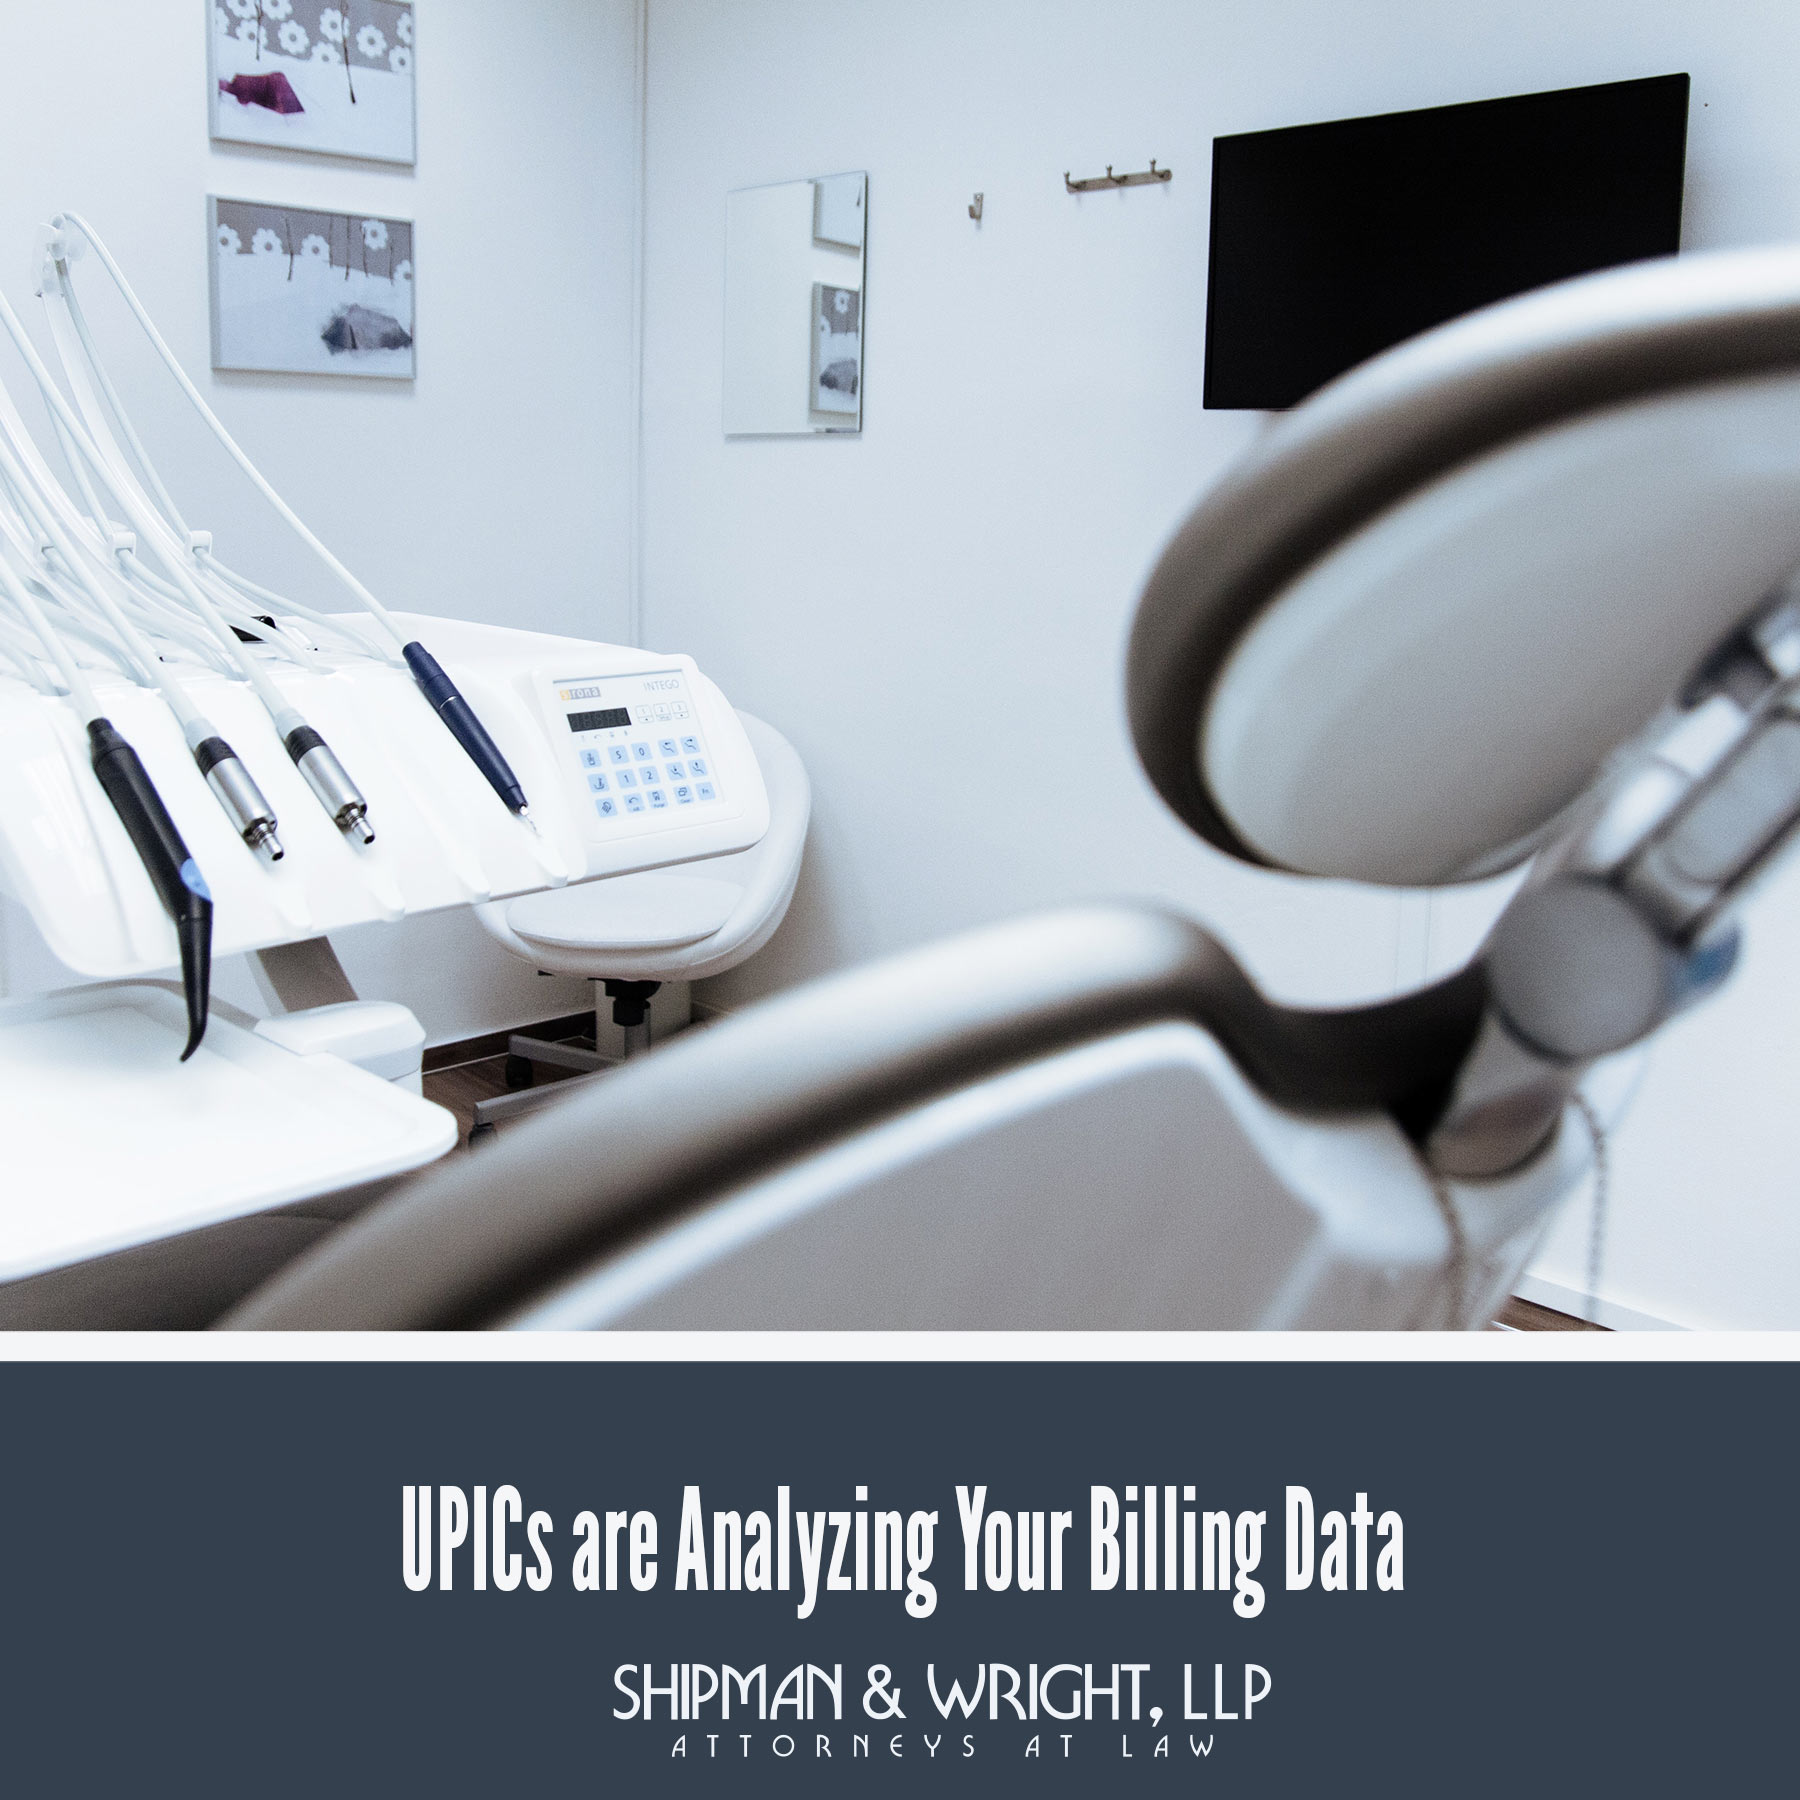 UPICs are Analyzing Your Billing Data